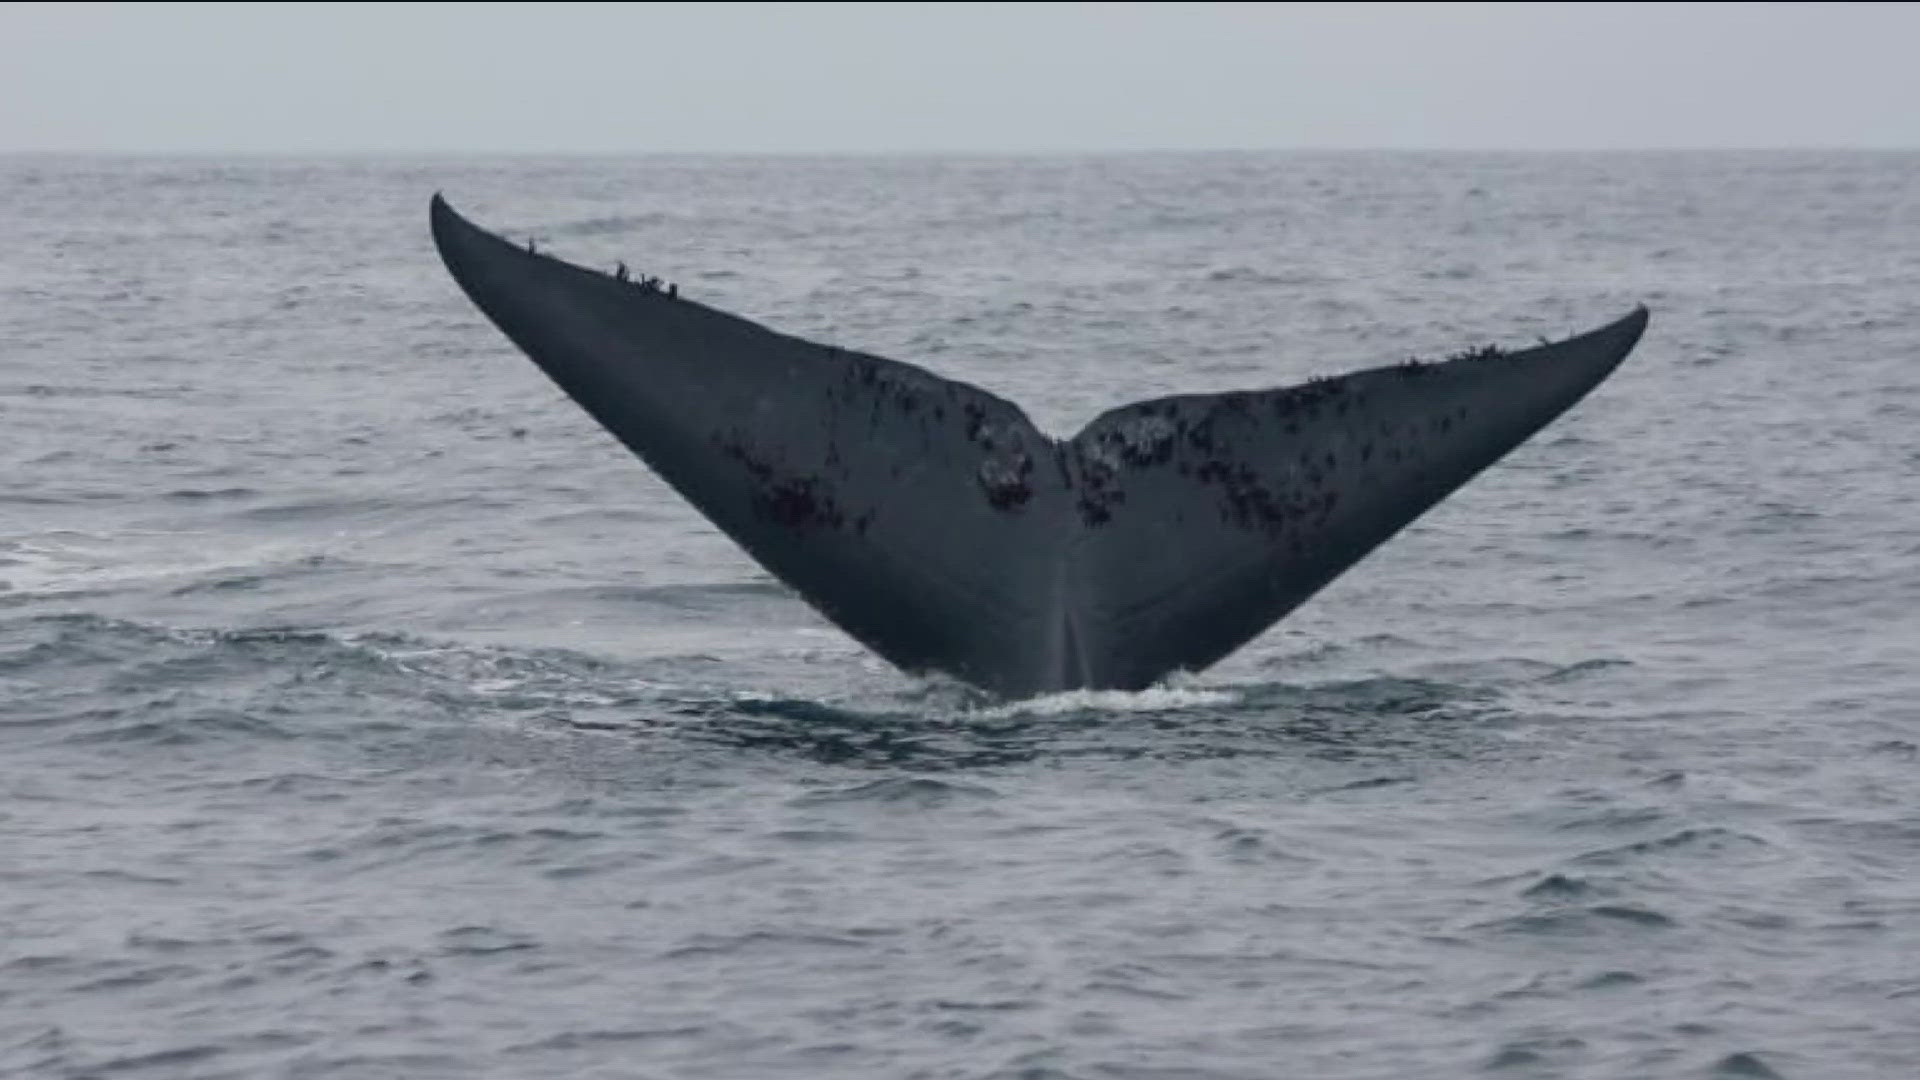 As much as people love whales and are diving into this exciting form of eco-tourism, WILDCOAST wants boaters to know it’s important to respect the ways of the whale.